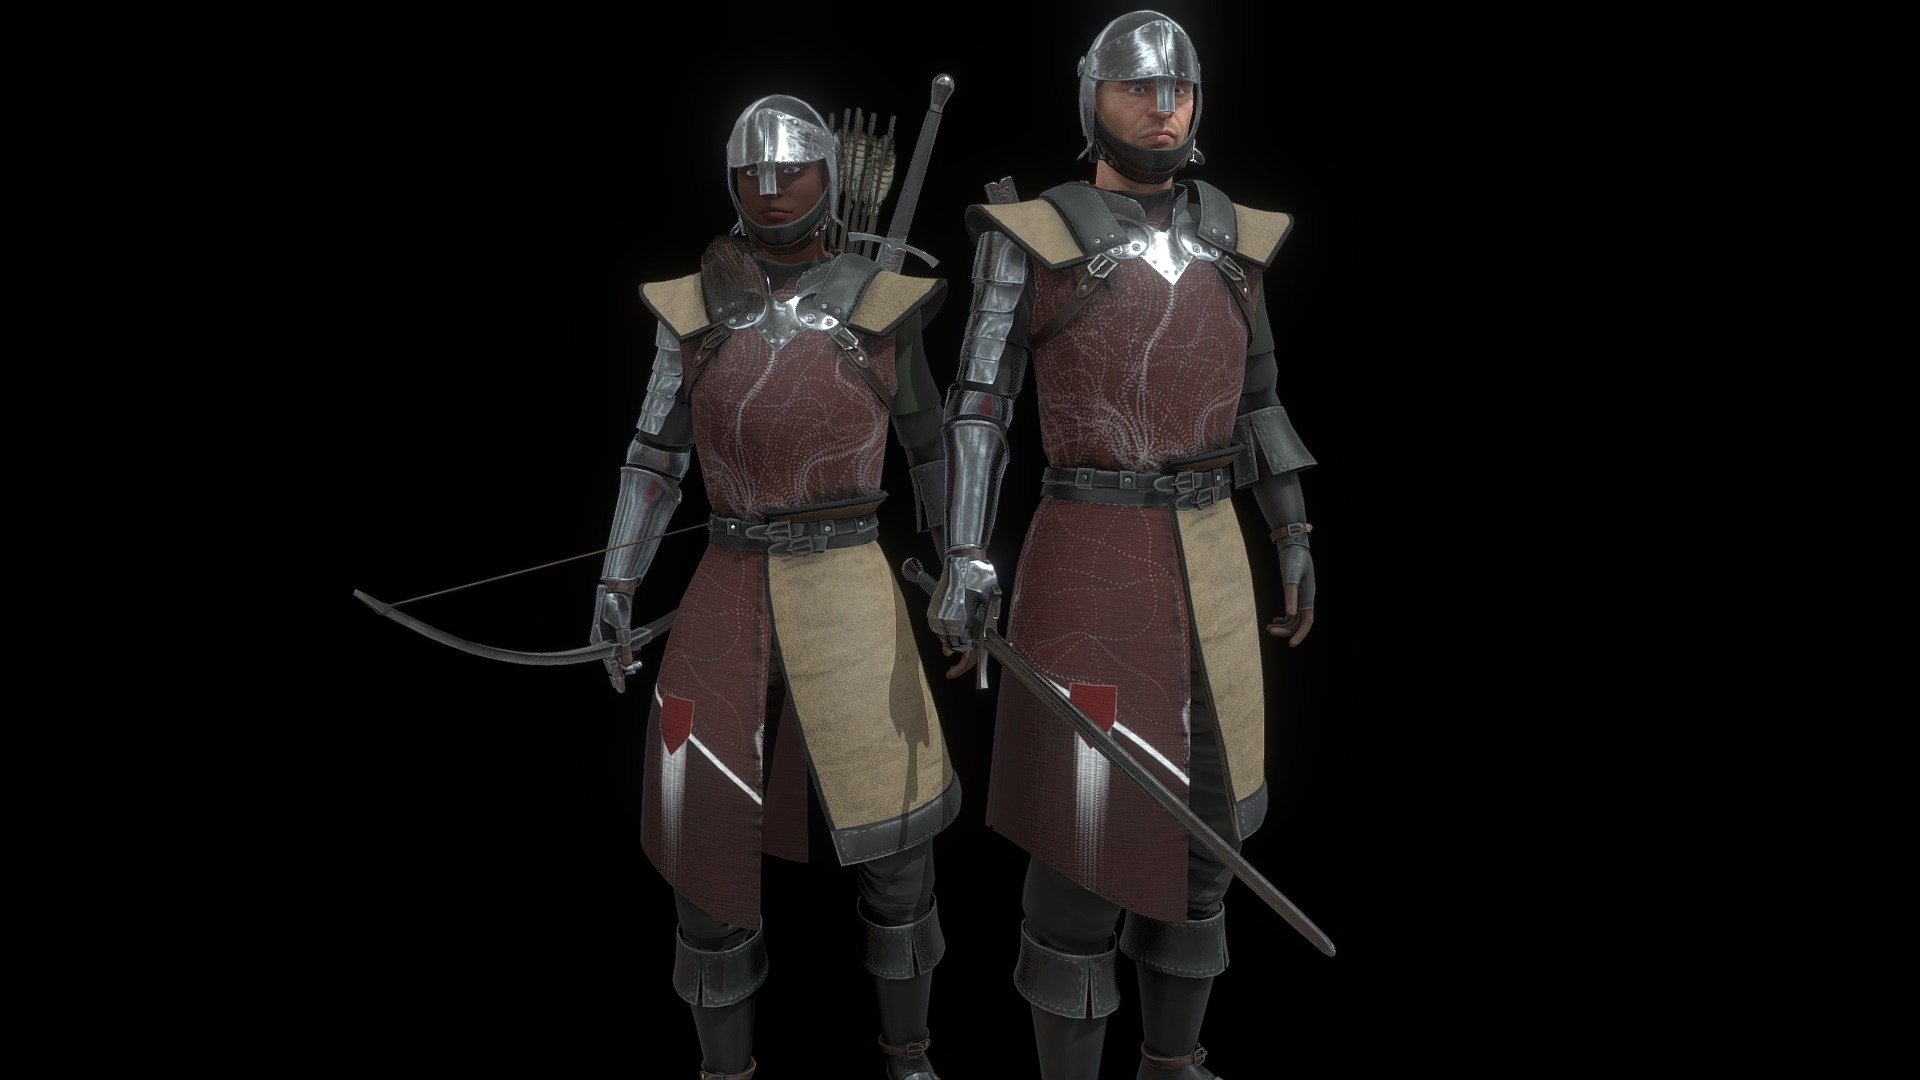 A clothing and armor set designed for my fantasy RPG, Riptide.

28K per armor set including weapons. I am happy with the poly count and rigging, but this design of the Highlander City Guards is still a work in progress.

Please visit and support my life-long creation, Riptide 3d model